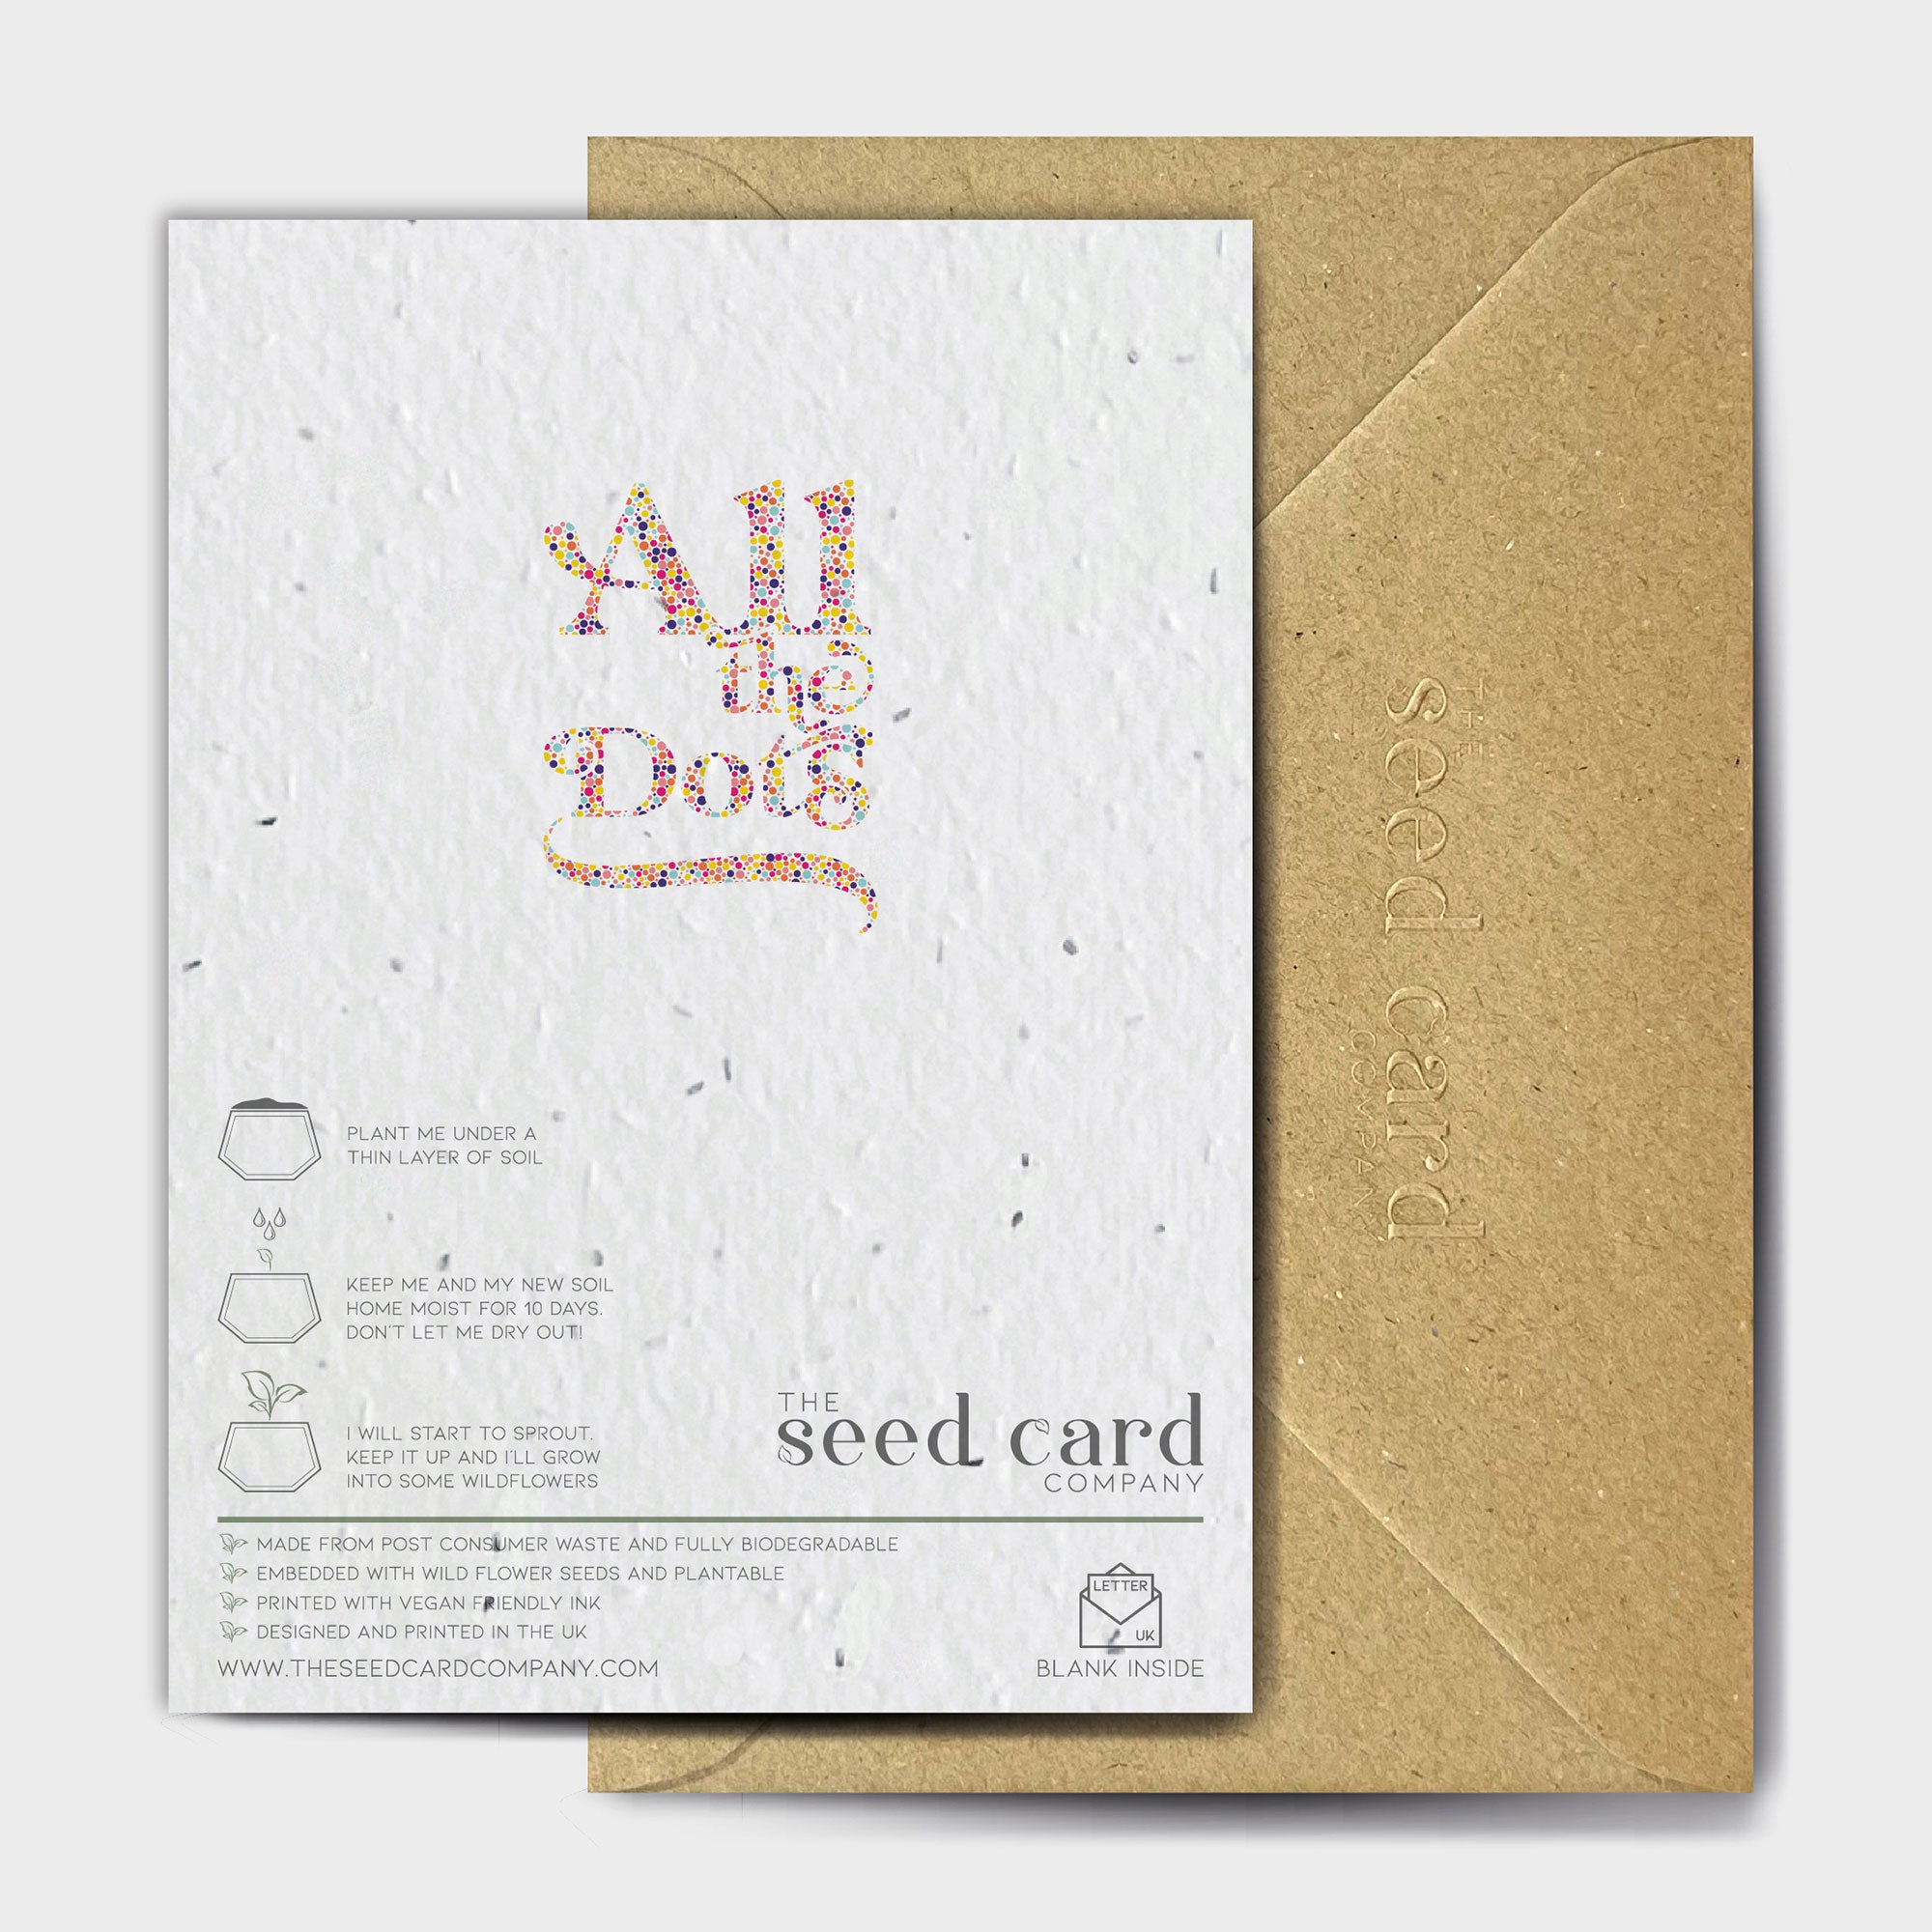 Shop online Baby It's Cold Outside - 100% biodegradable seed-embedded cards Shop -The Seed Card Company